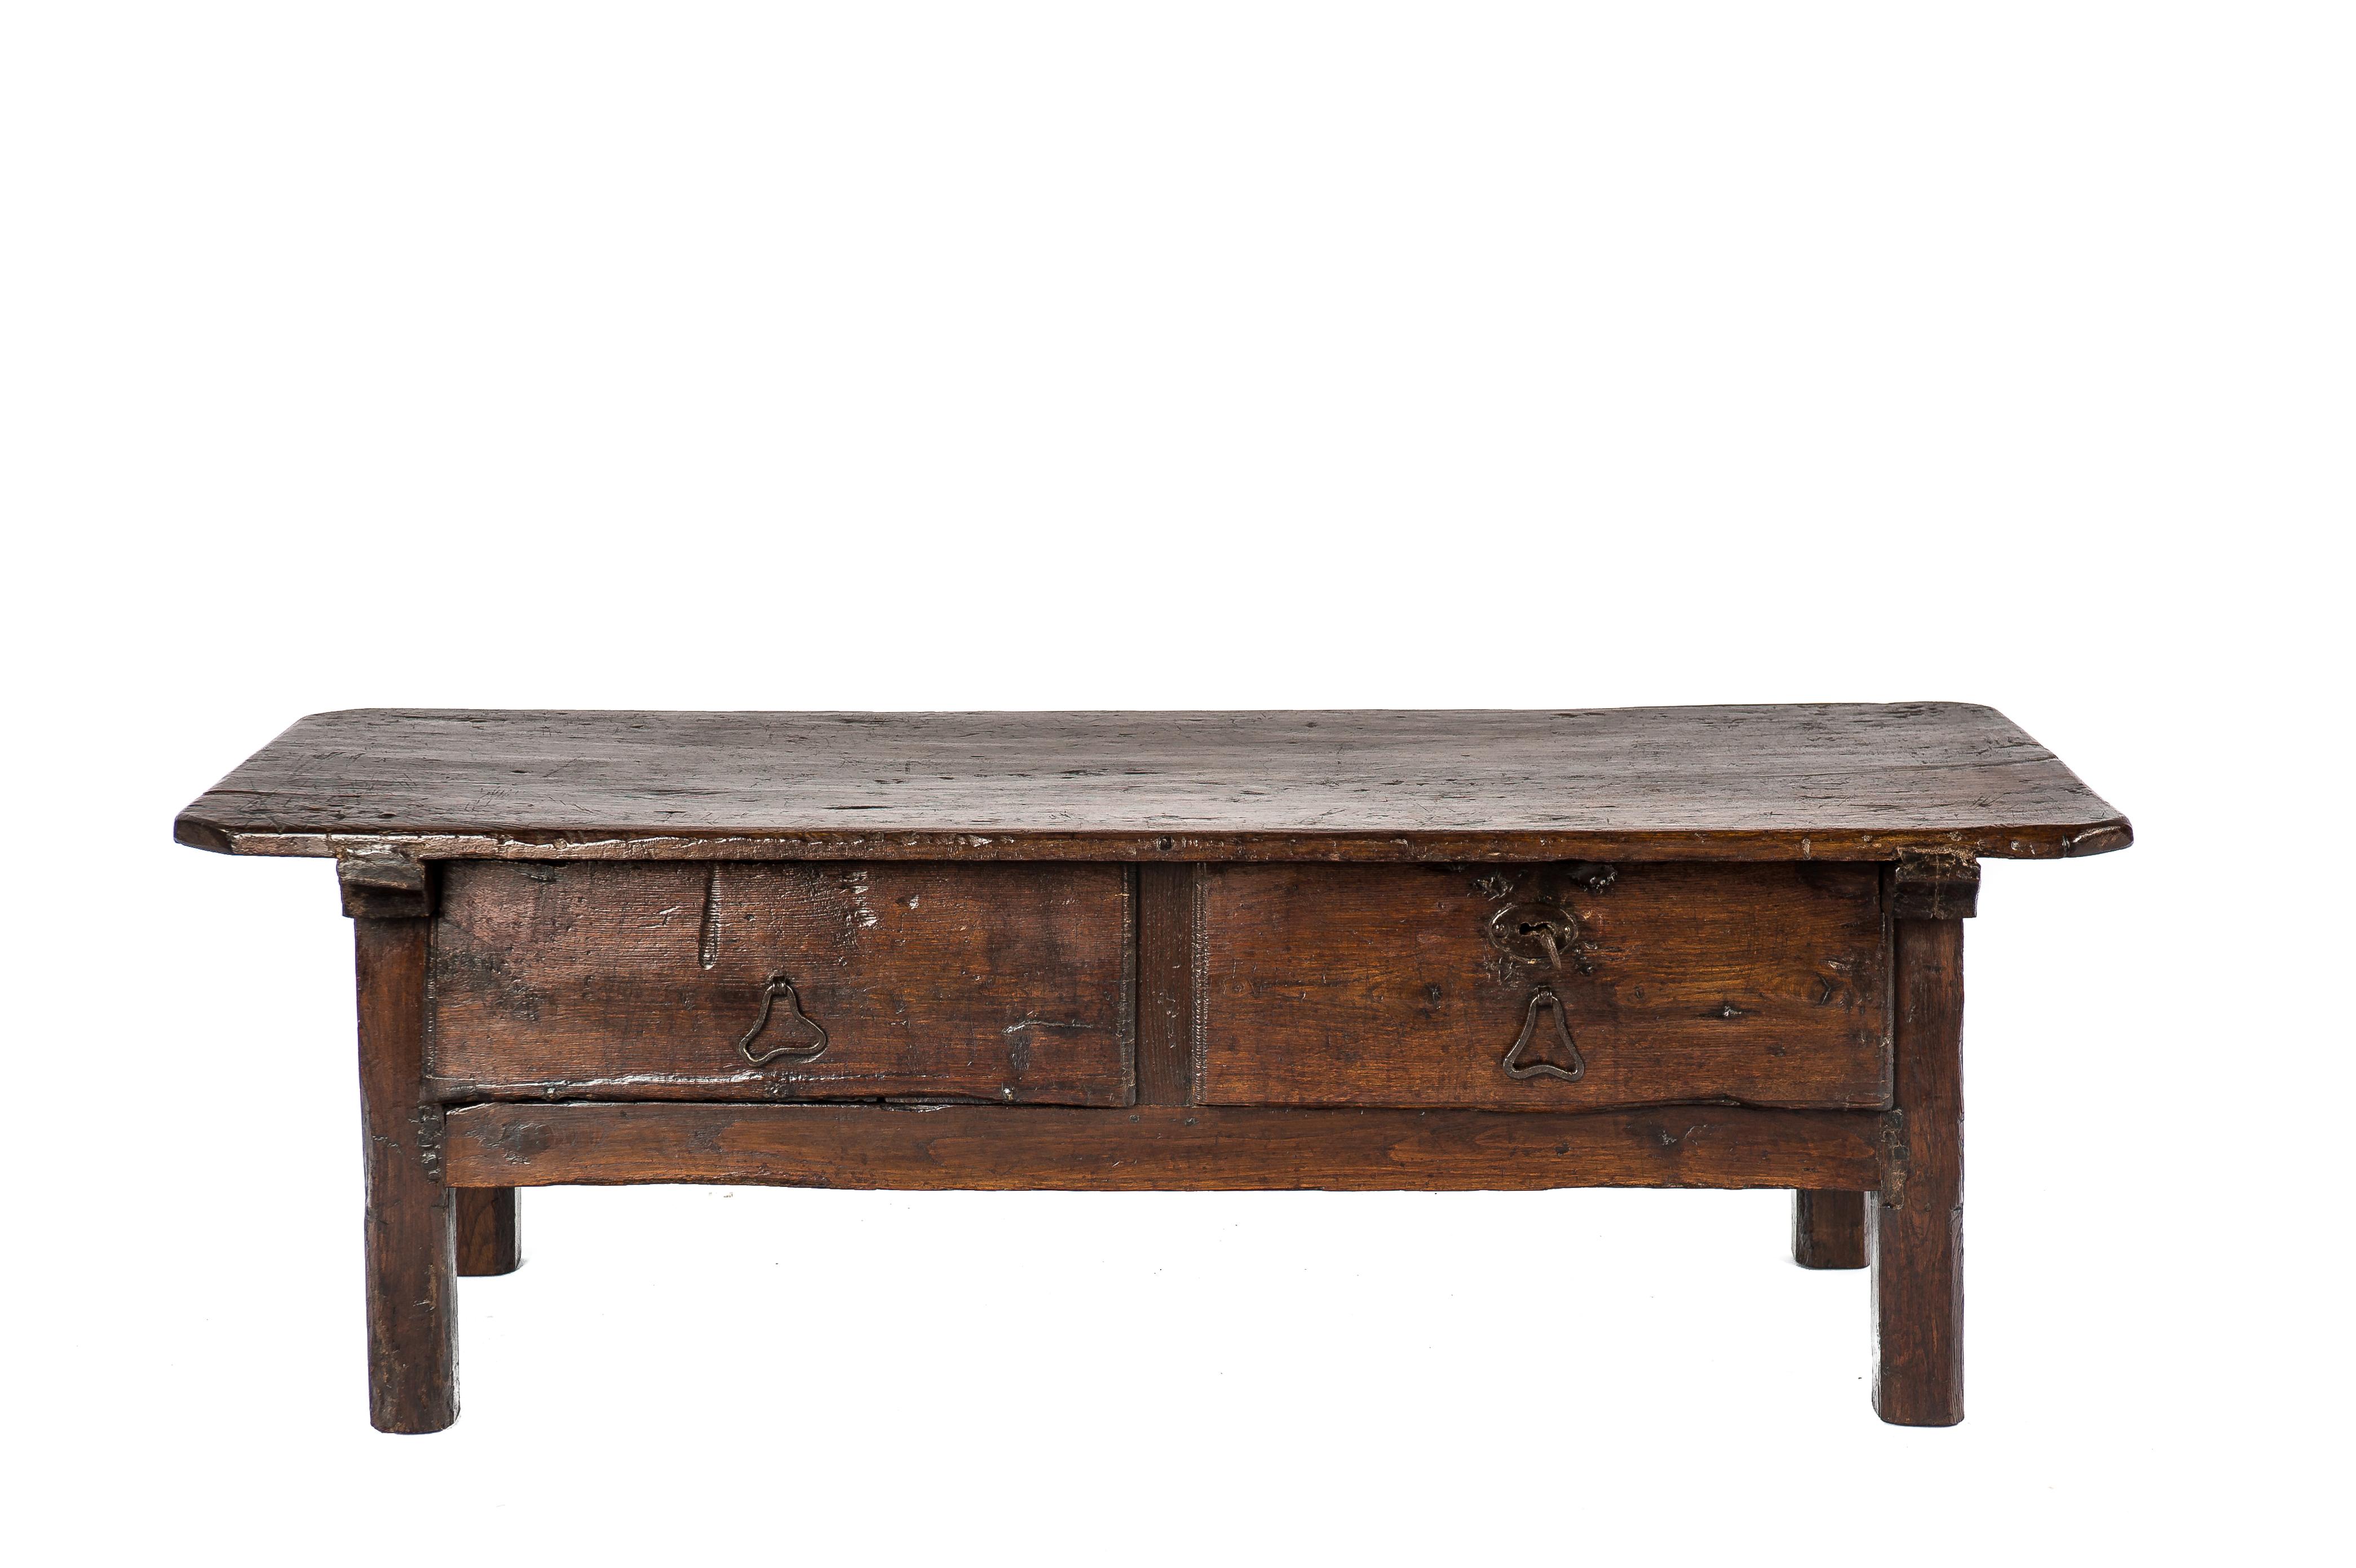 This beautiful warm brown color rustic coffee table or low table originates in Spain and dates circa 1780. The table has a unique top that was made of a single board of solid chestnut wood 1 inch thick. The top has a beautiful grain pattern with